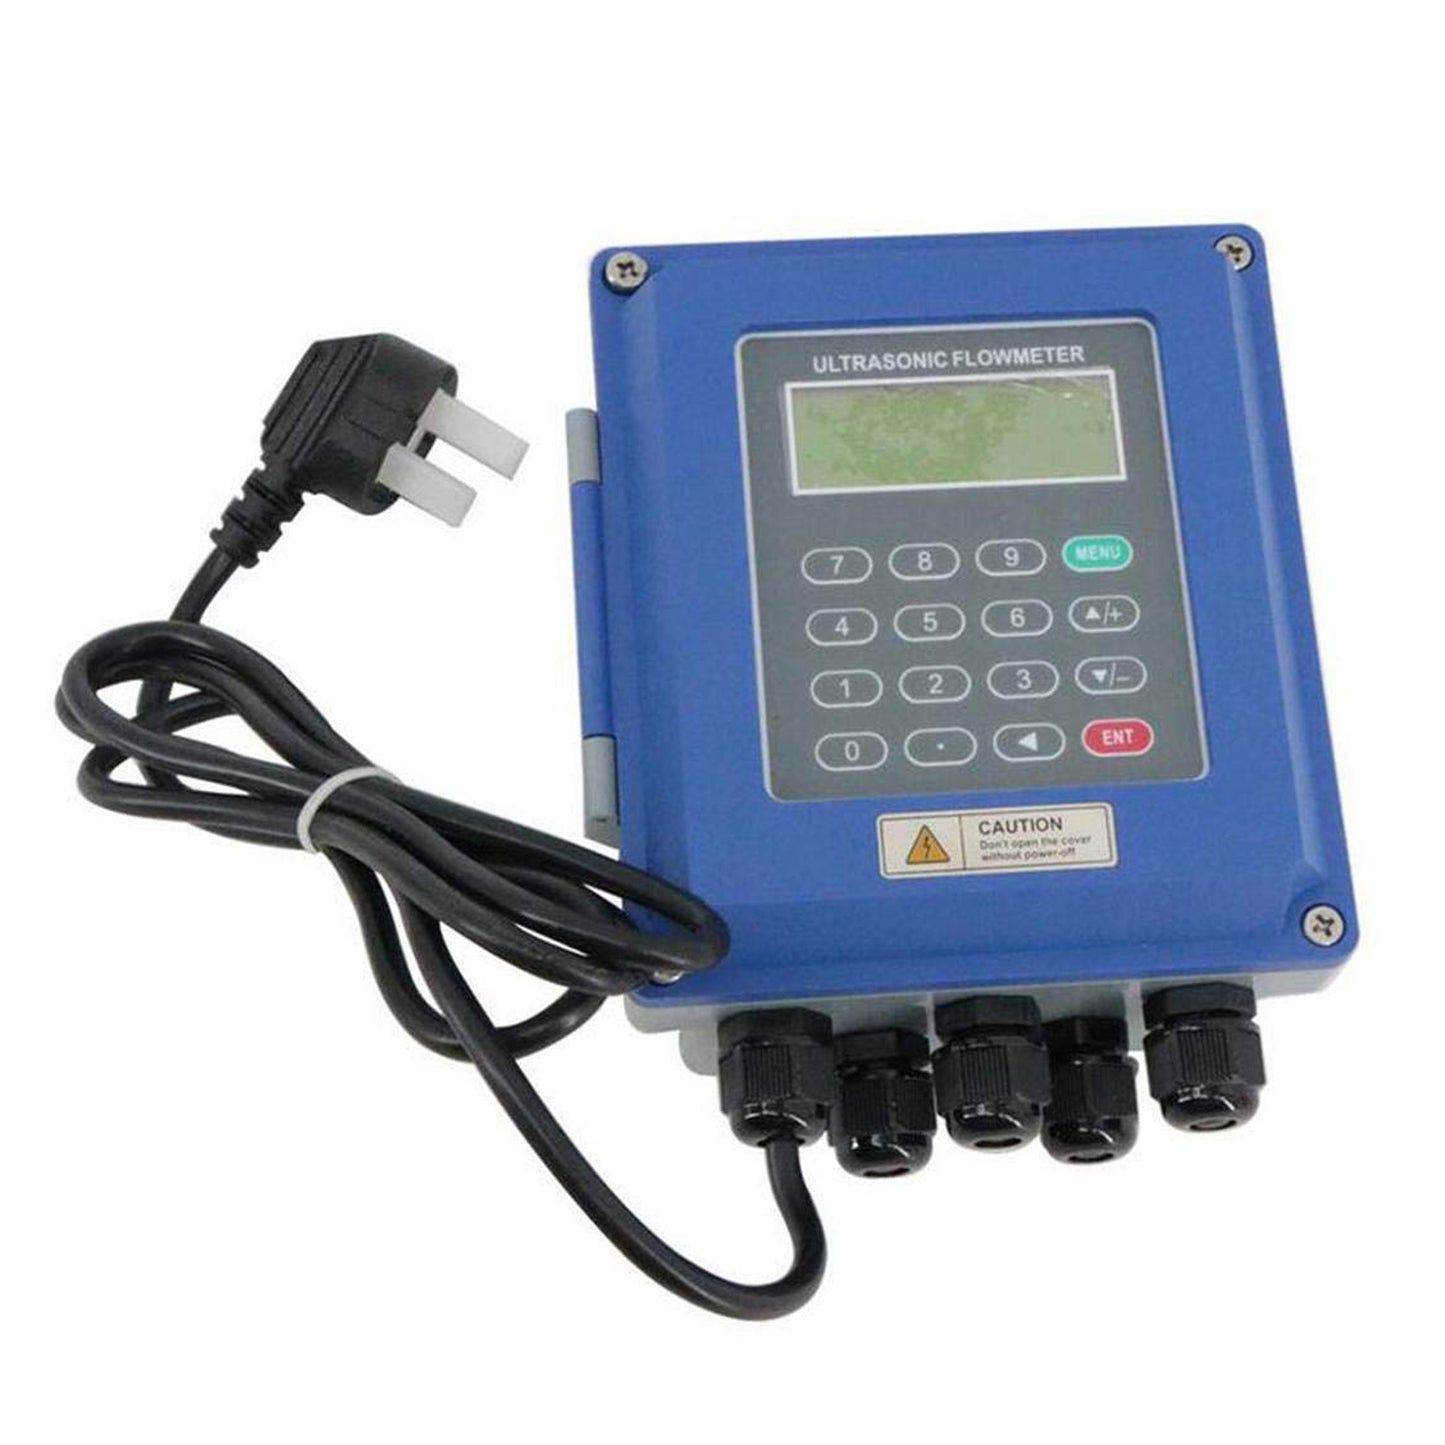 VTSYIQI Digital Ultrasonic Flow Meter Liquid Flowmeter With DN25mm-DN100mm Wall Mounted Type RS485 Interface IP67 Protection TS-2 Transducer